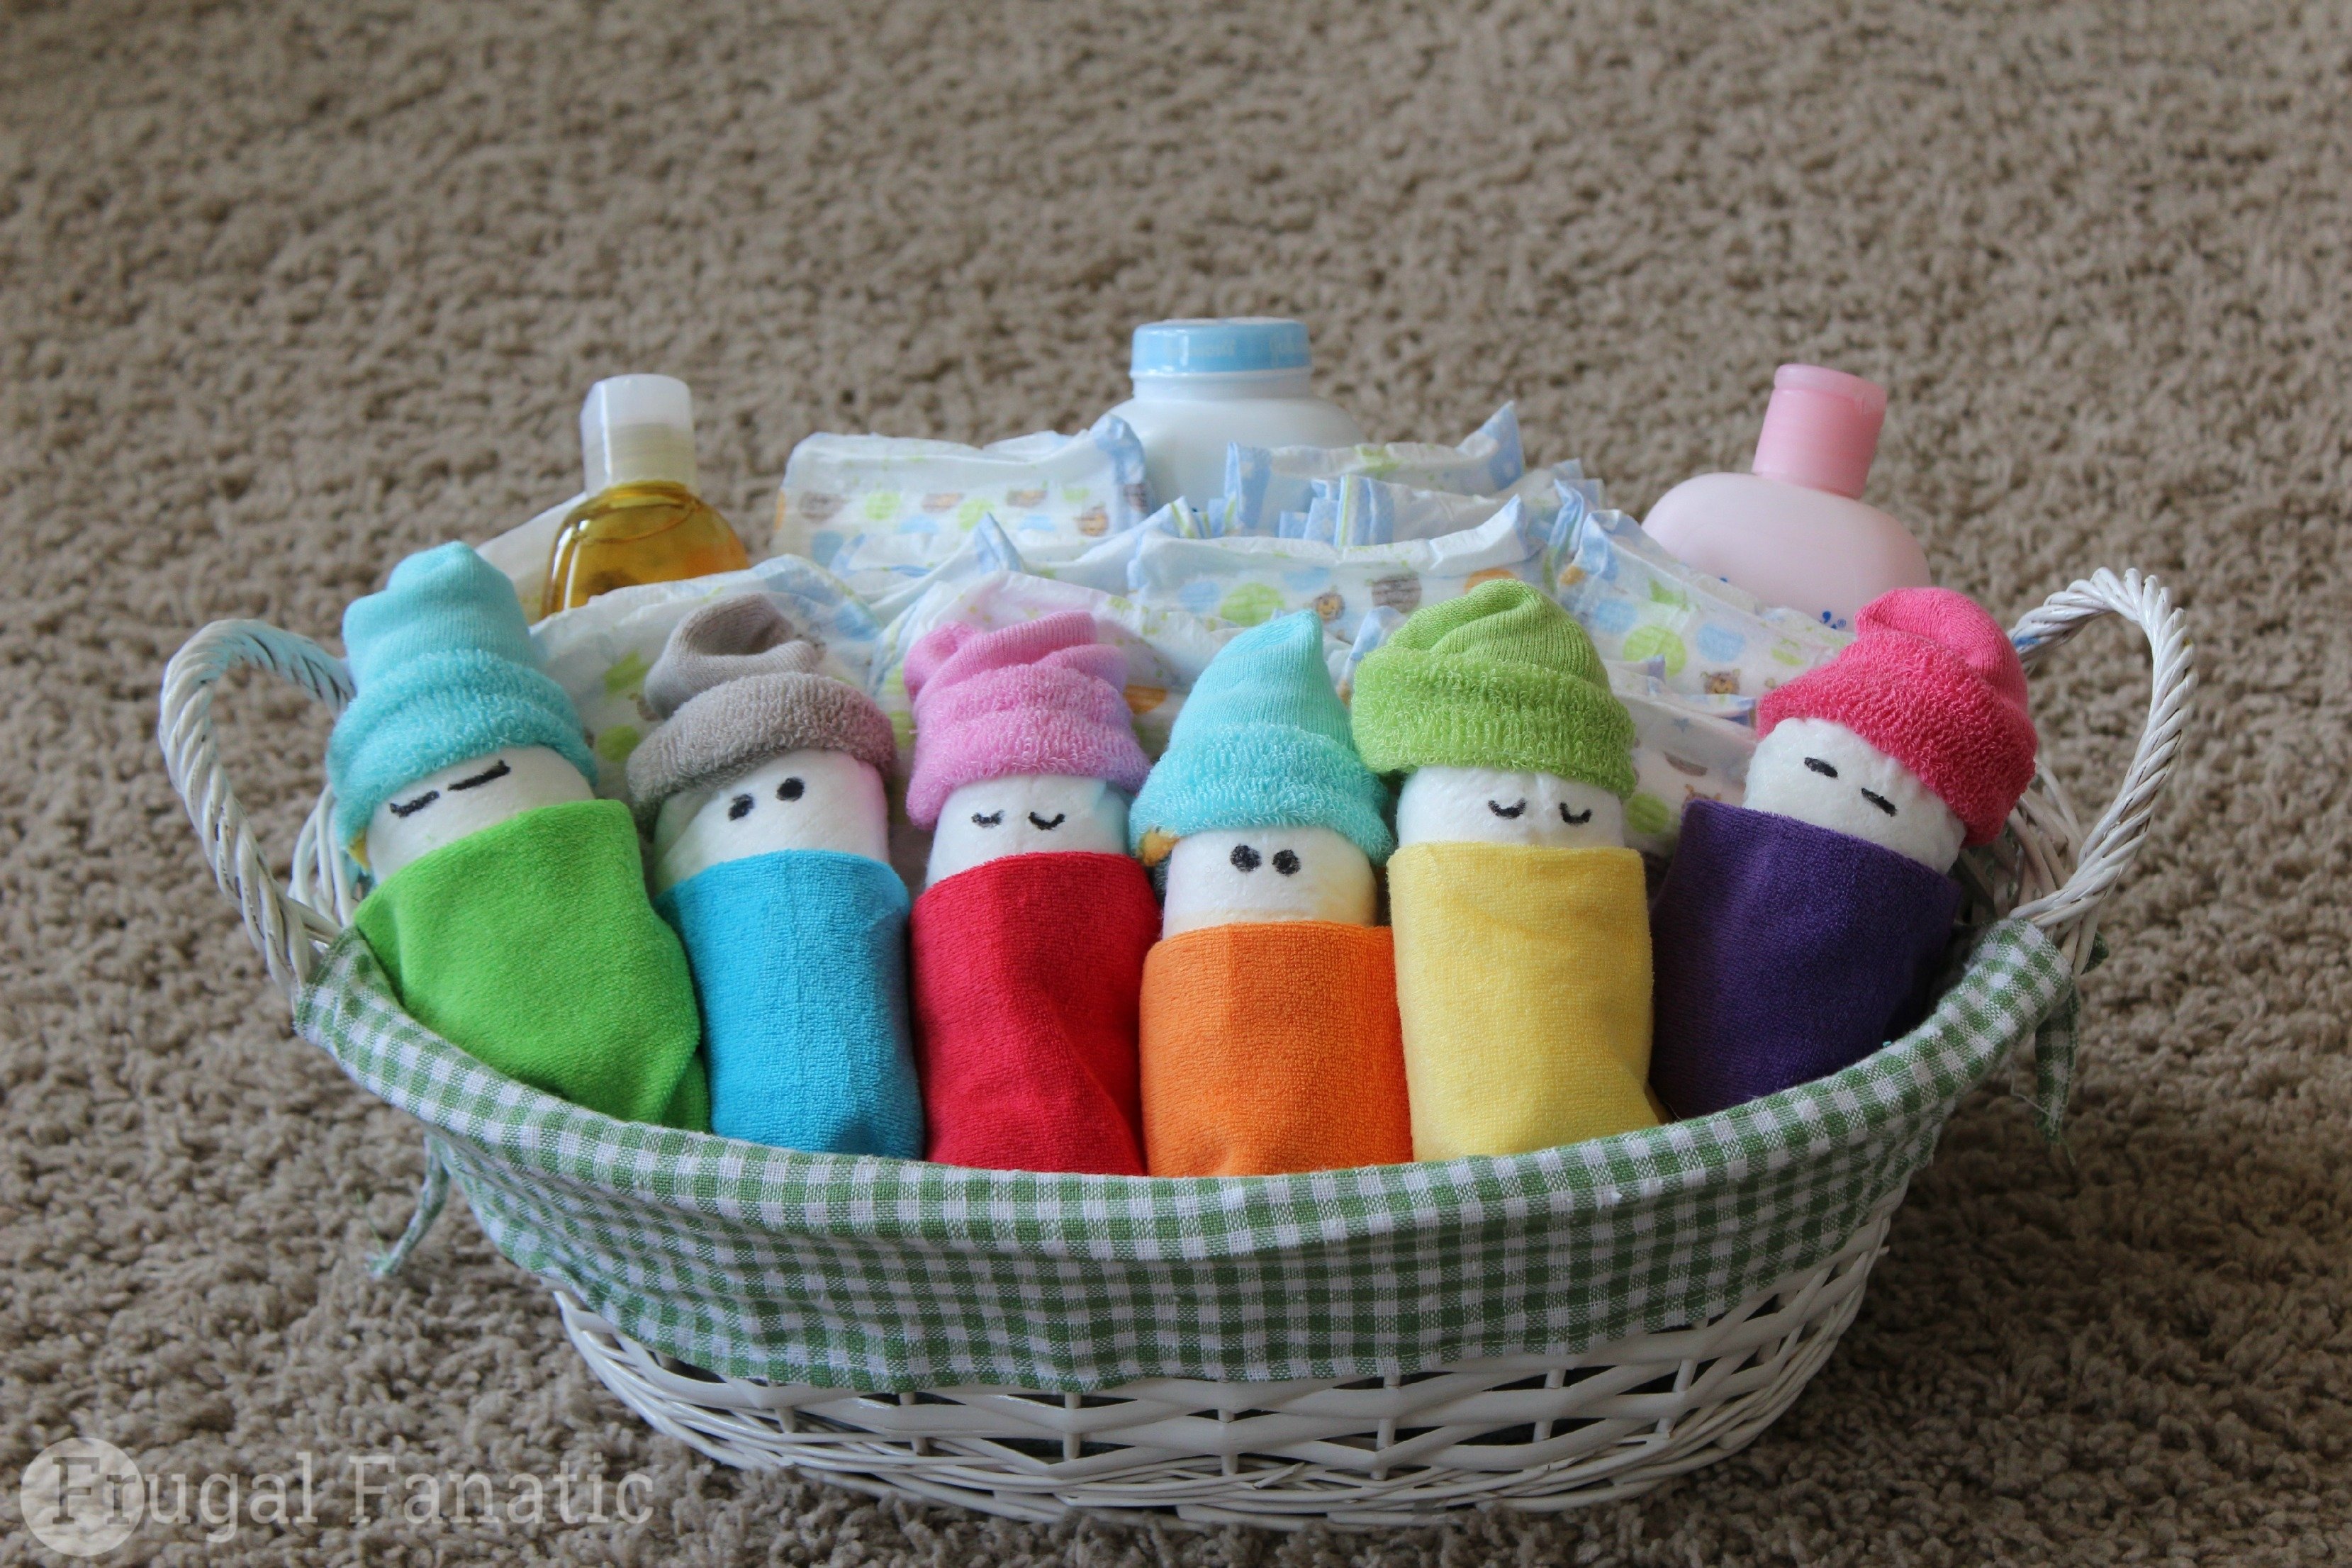 10 Stylish Homemade Baby Shower Gift Ideas how to make diaper babies easy baby shower gift idea frugal fanatic 2023